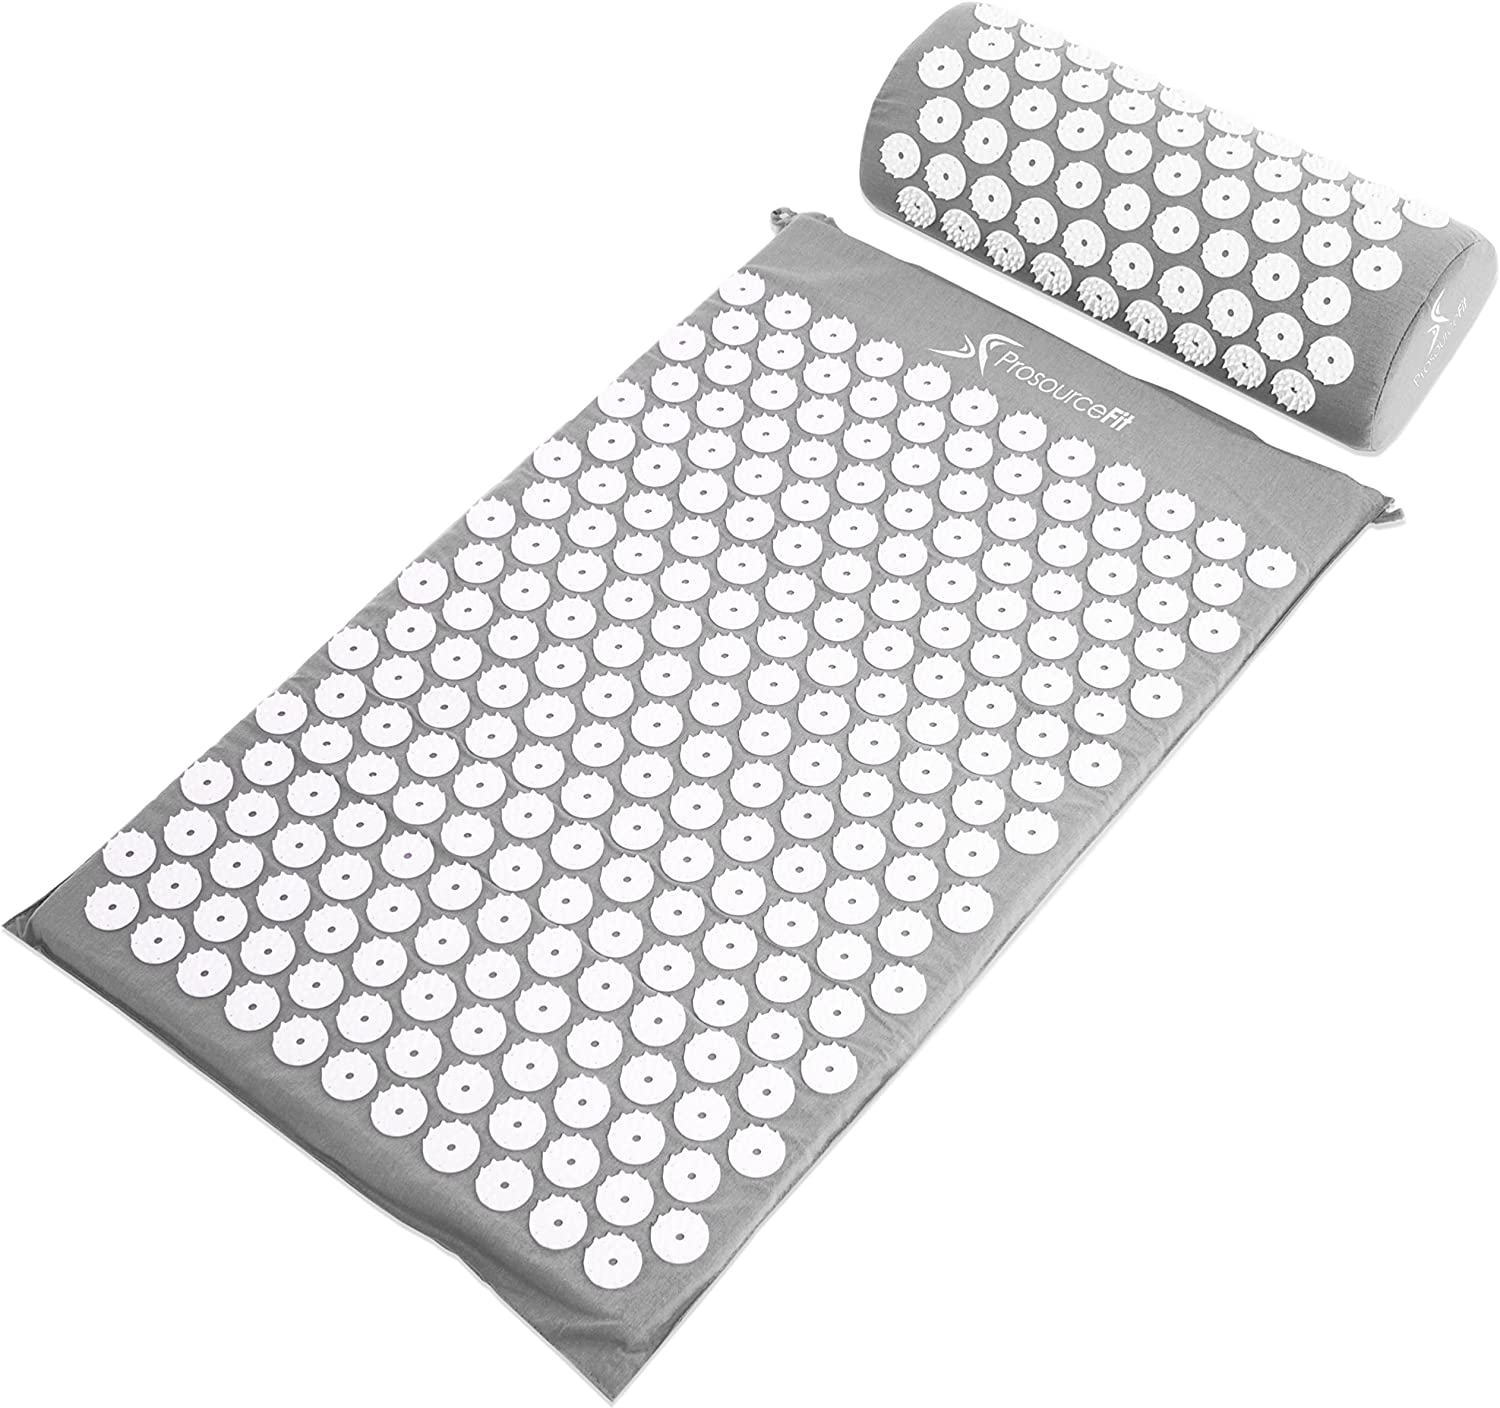 Review of ProsourceFit Acupressure Mat and Pillow Set for Back/Neck Pain Relief and Muscle Relaxation